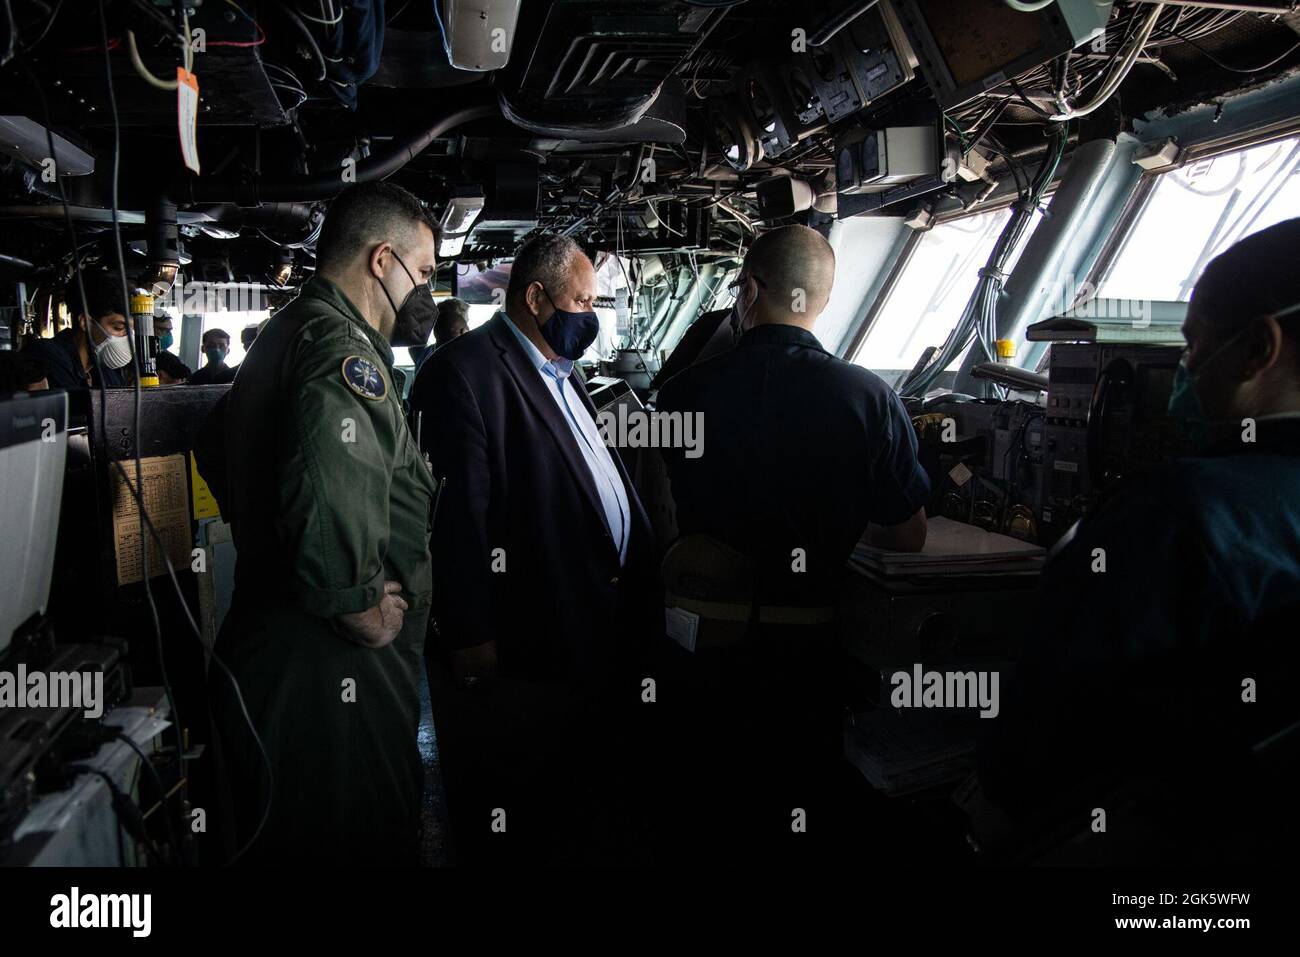 U.S. Secretary of the Navy Carlos Del Toro, receives a tour of the bridge of the USS Kearsarge during Large Scale Exercise (LSE) 2021, off the coast of North Carolina, Aug. 10, 2021. II MEF is a maritime force inextricably linked to our Navy partners in U.S. 6th and 2nd Fleets, creating mutual interdependence with our Fleet counterparts leverages our collective capabilities and increases maritime lethality. LSE 2021 merges live and synthetic training capabilities to create an intense, robust training environment. Stock Photo